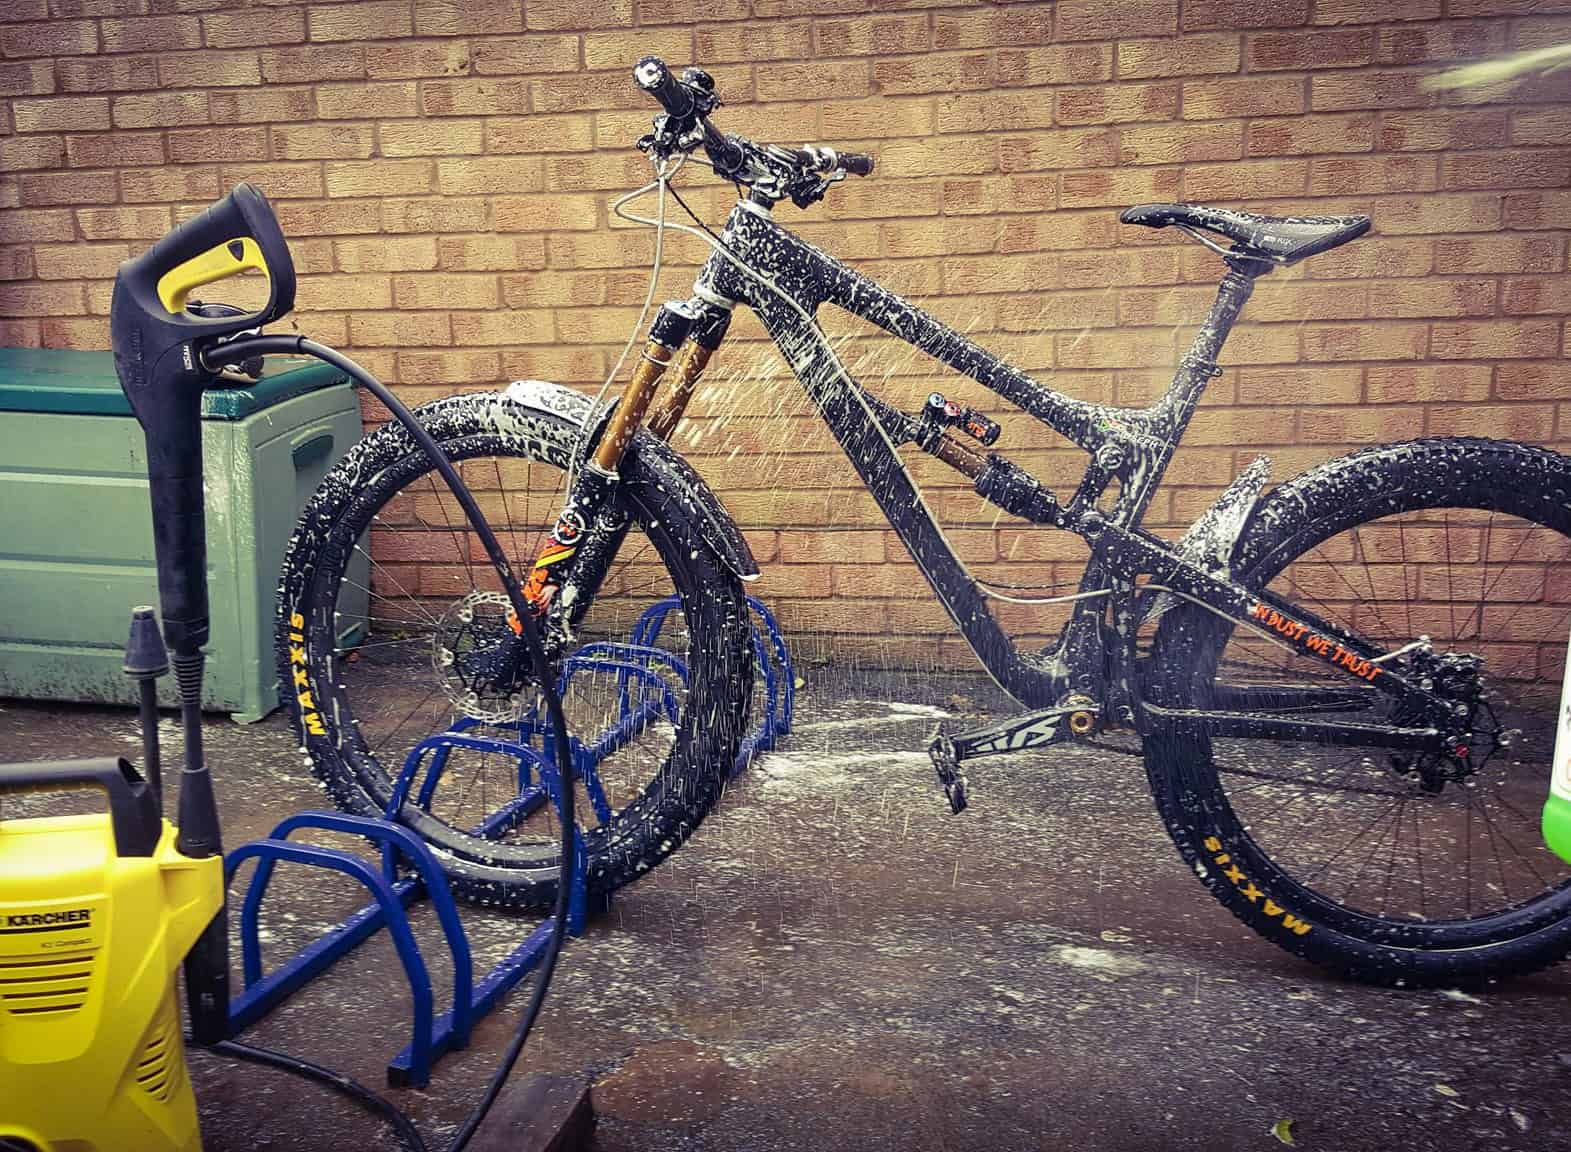 Bicycle Cleaning Kit